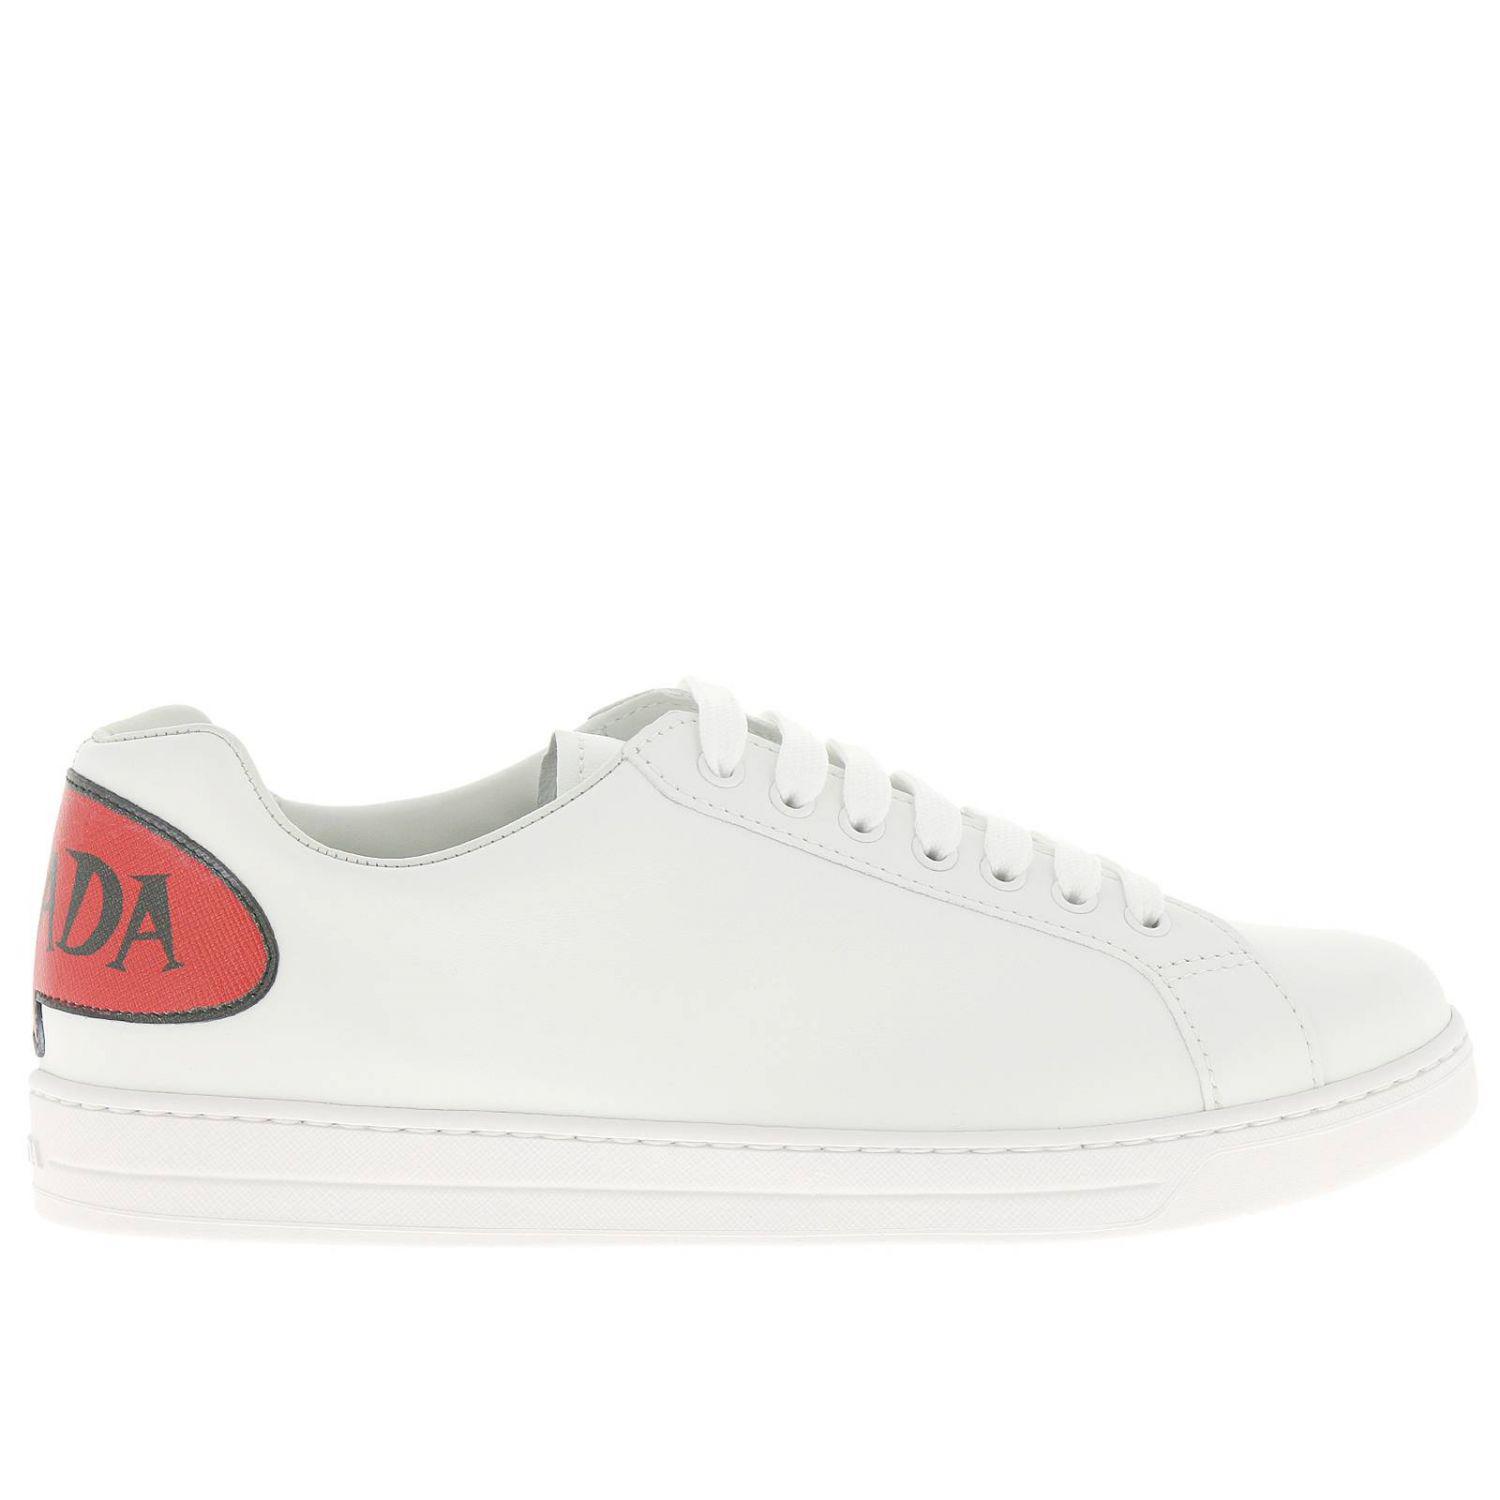 Prada Shoes Leather Trainers Sneakers in White for Men - Save 29 